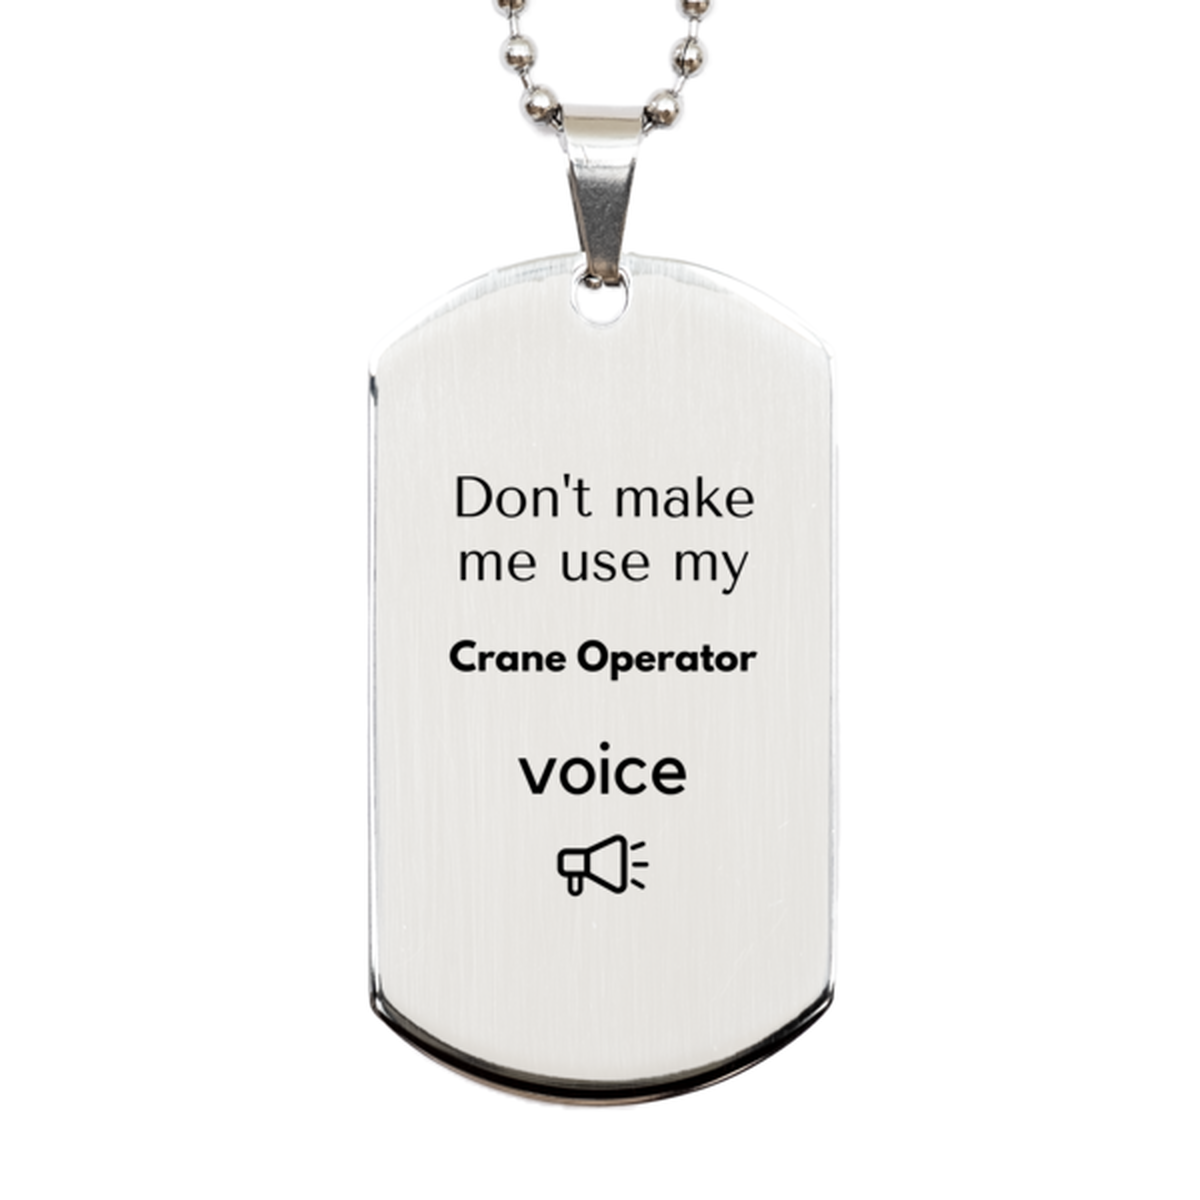 Don't make me use my Crane Operator voice, Sarcasm Crane Operator Gifts, Christmas Crane Operator Silver Dog Tag Birthday Unique Gifts For Crane Operator Coworkers, Men, Women, Colleague, Friends